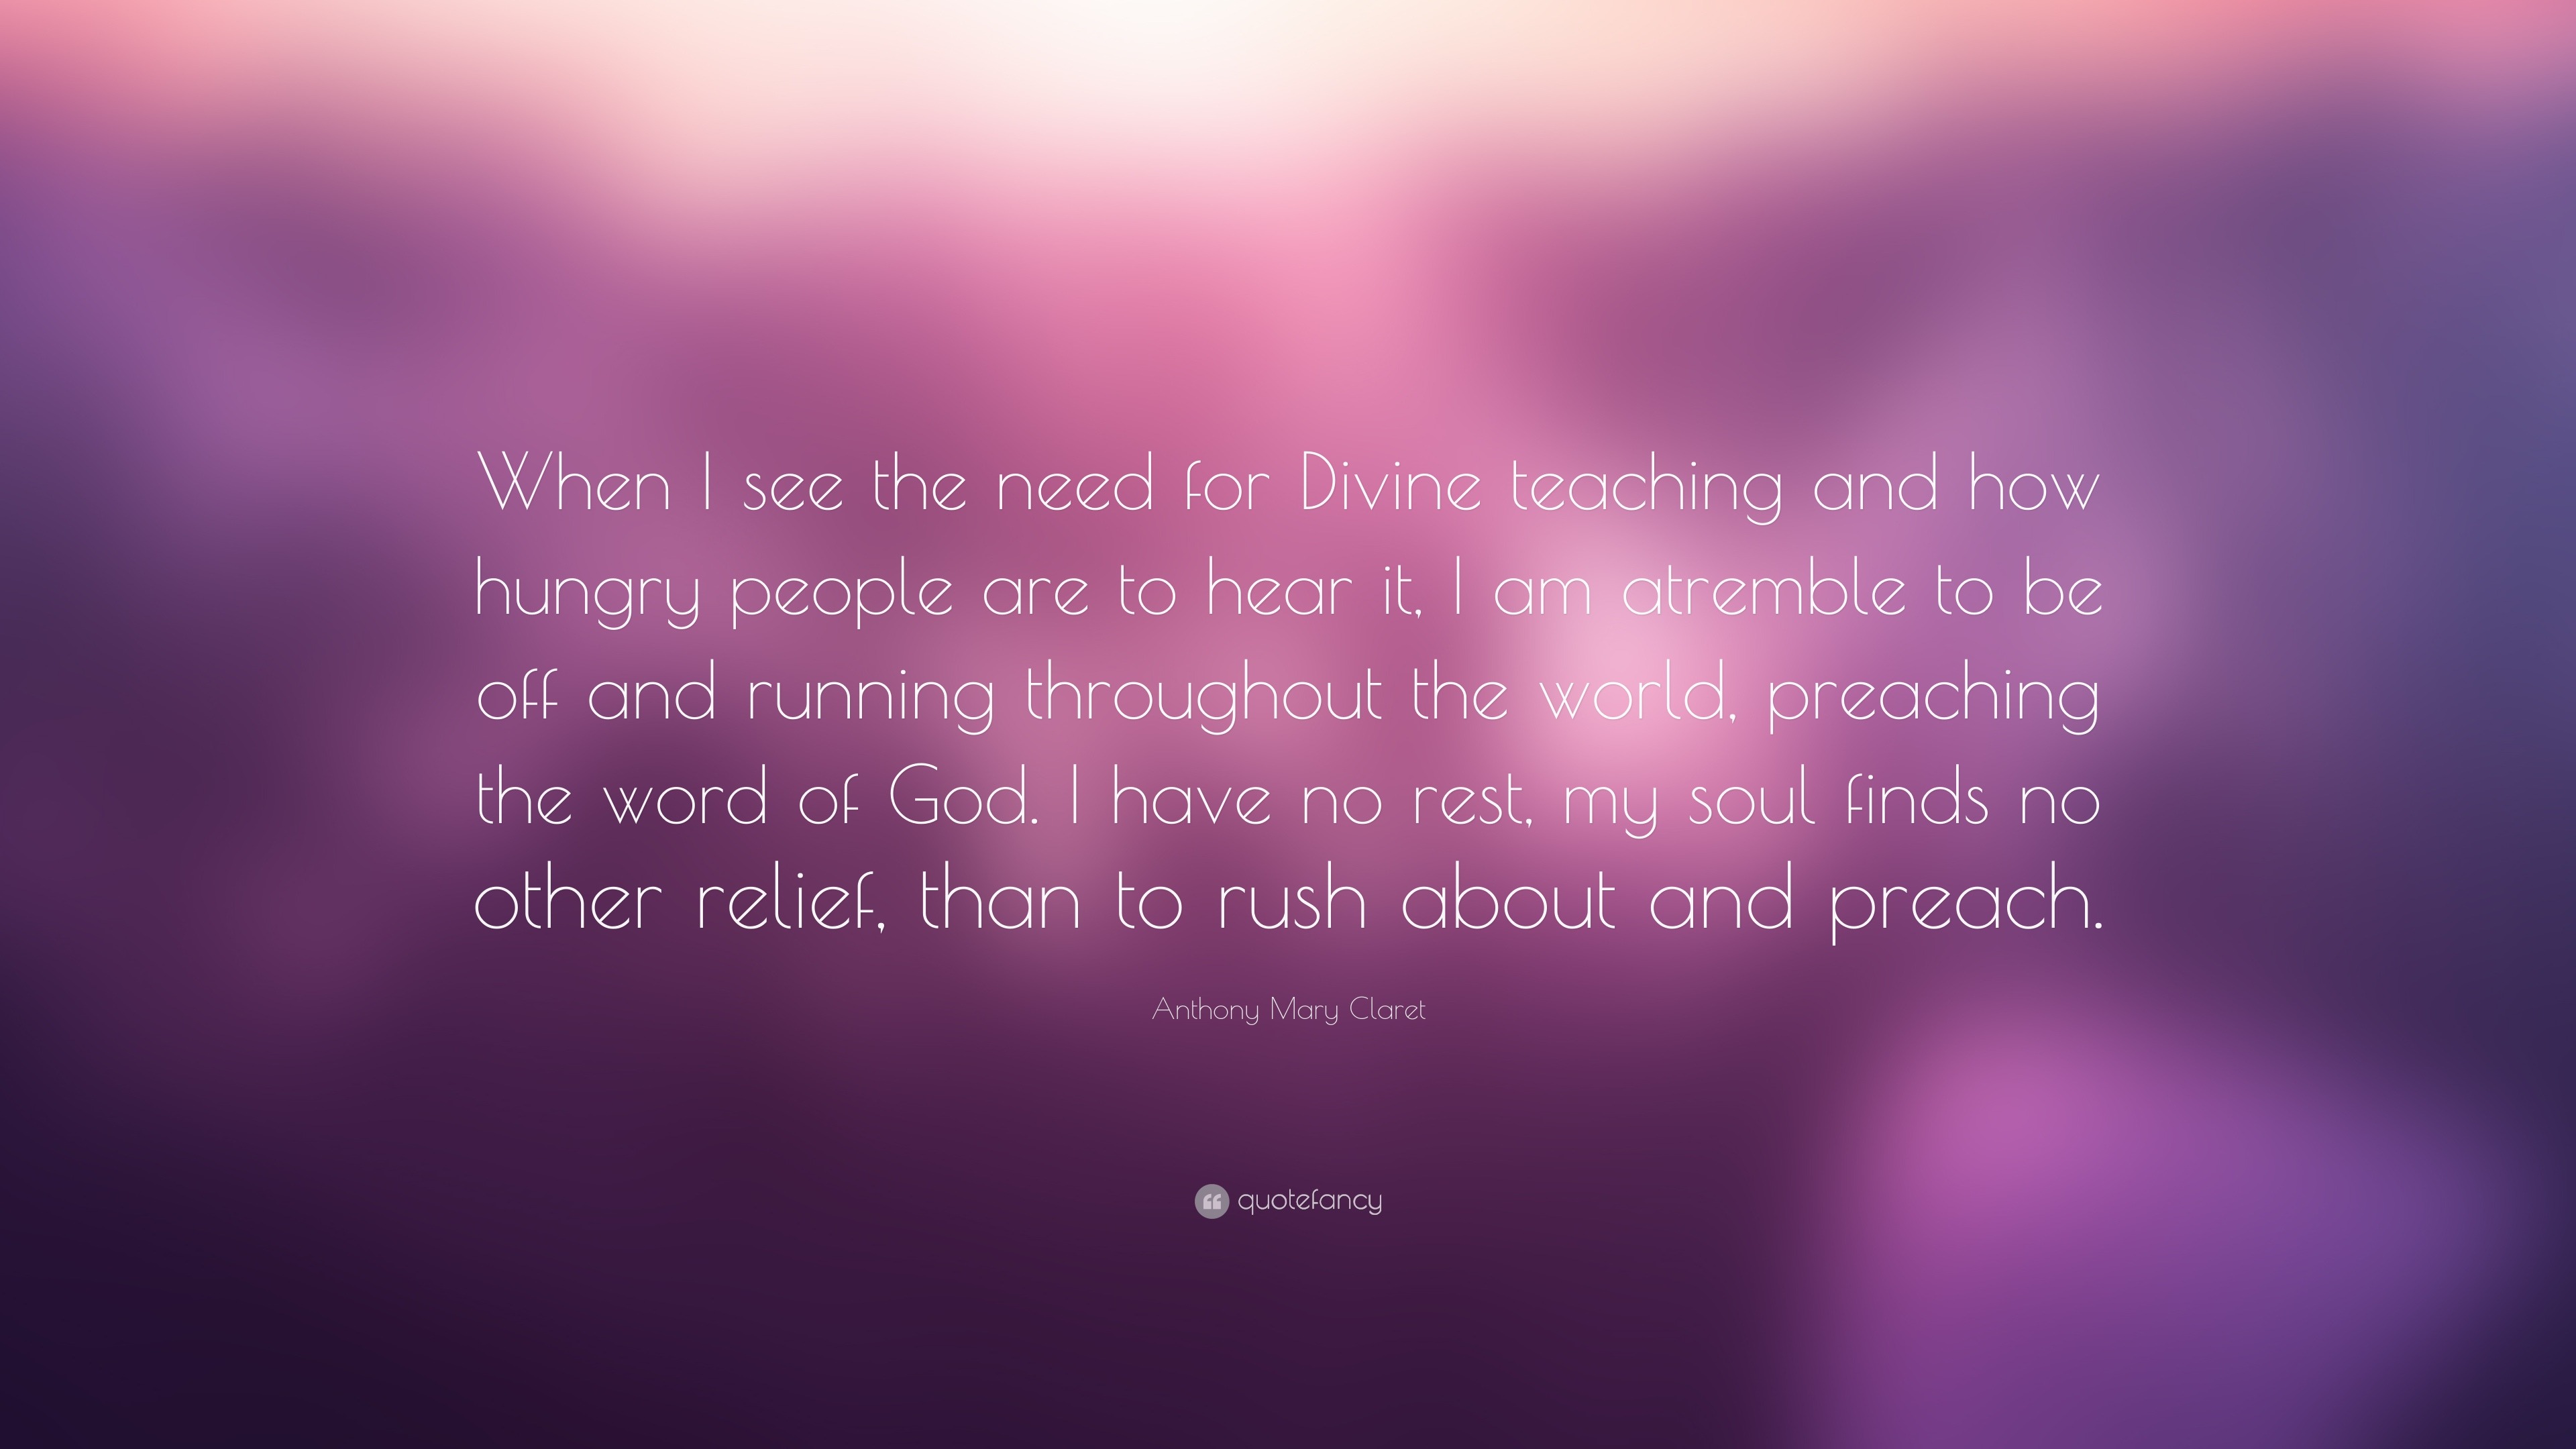 Anthony Mary Claret Quote: “When I see the need for Divine teaching and ...